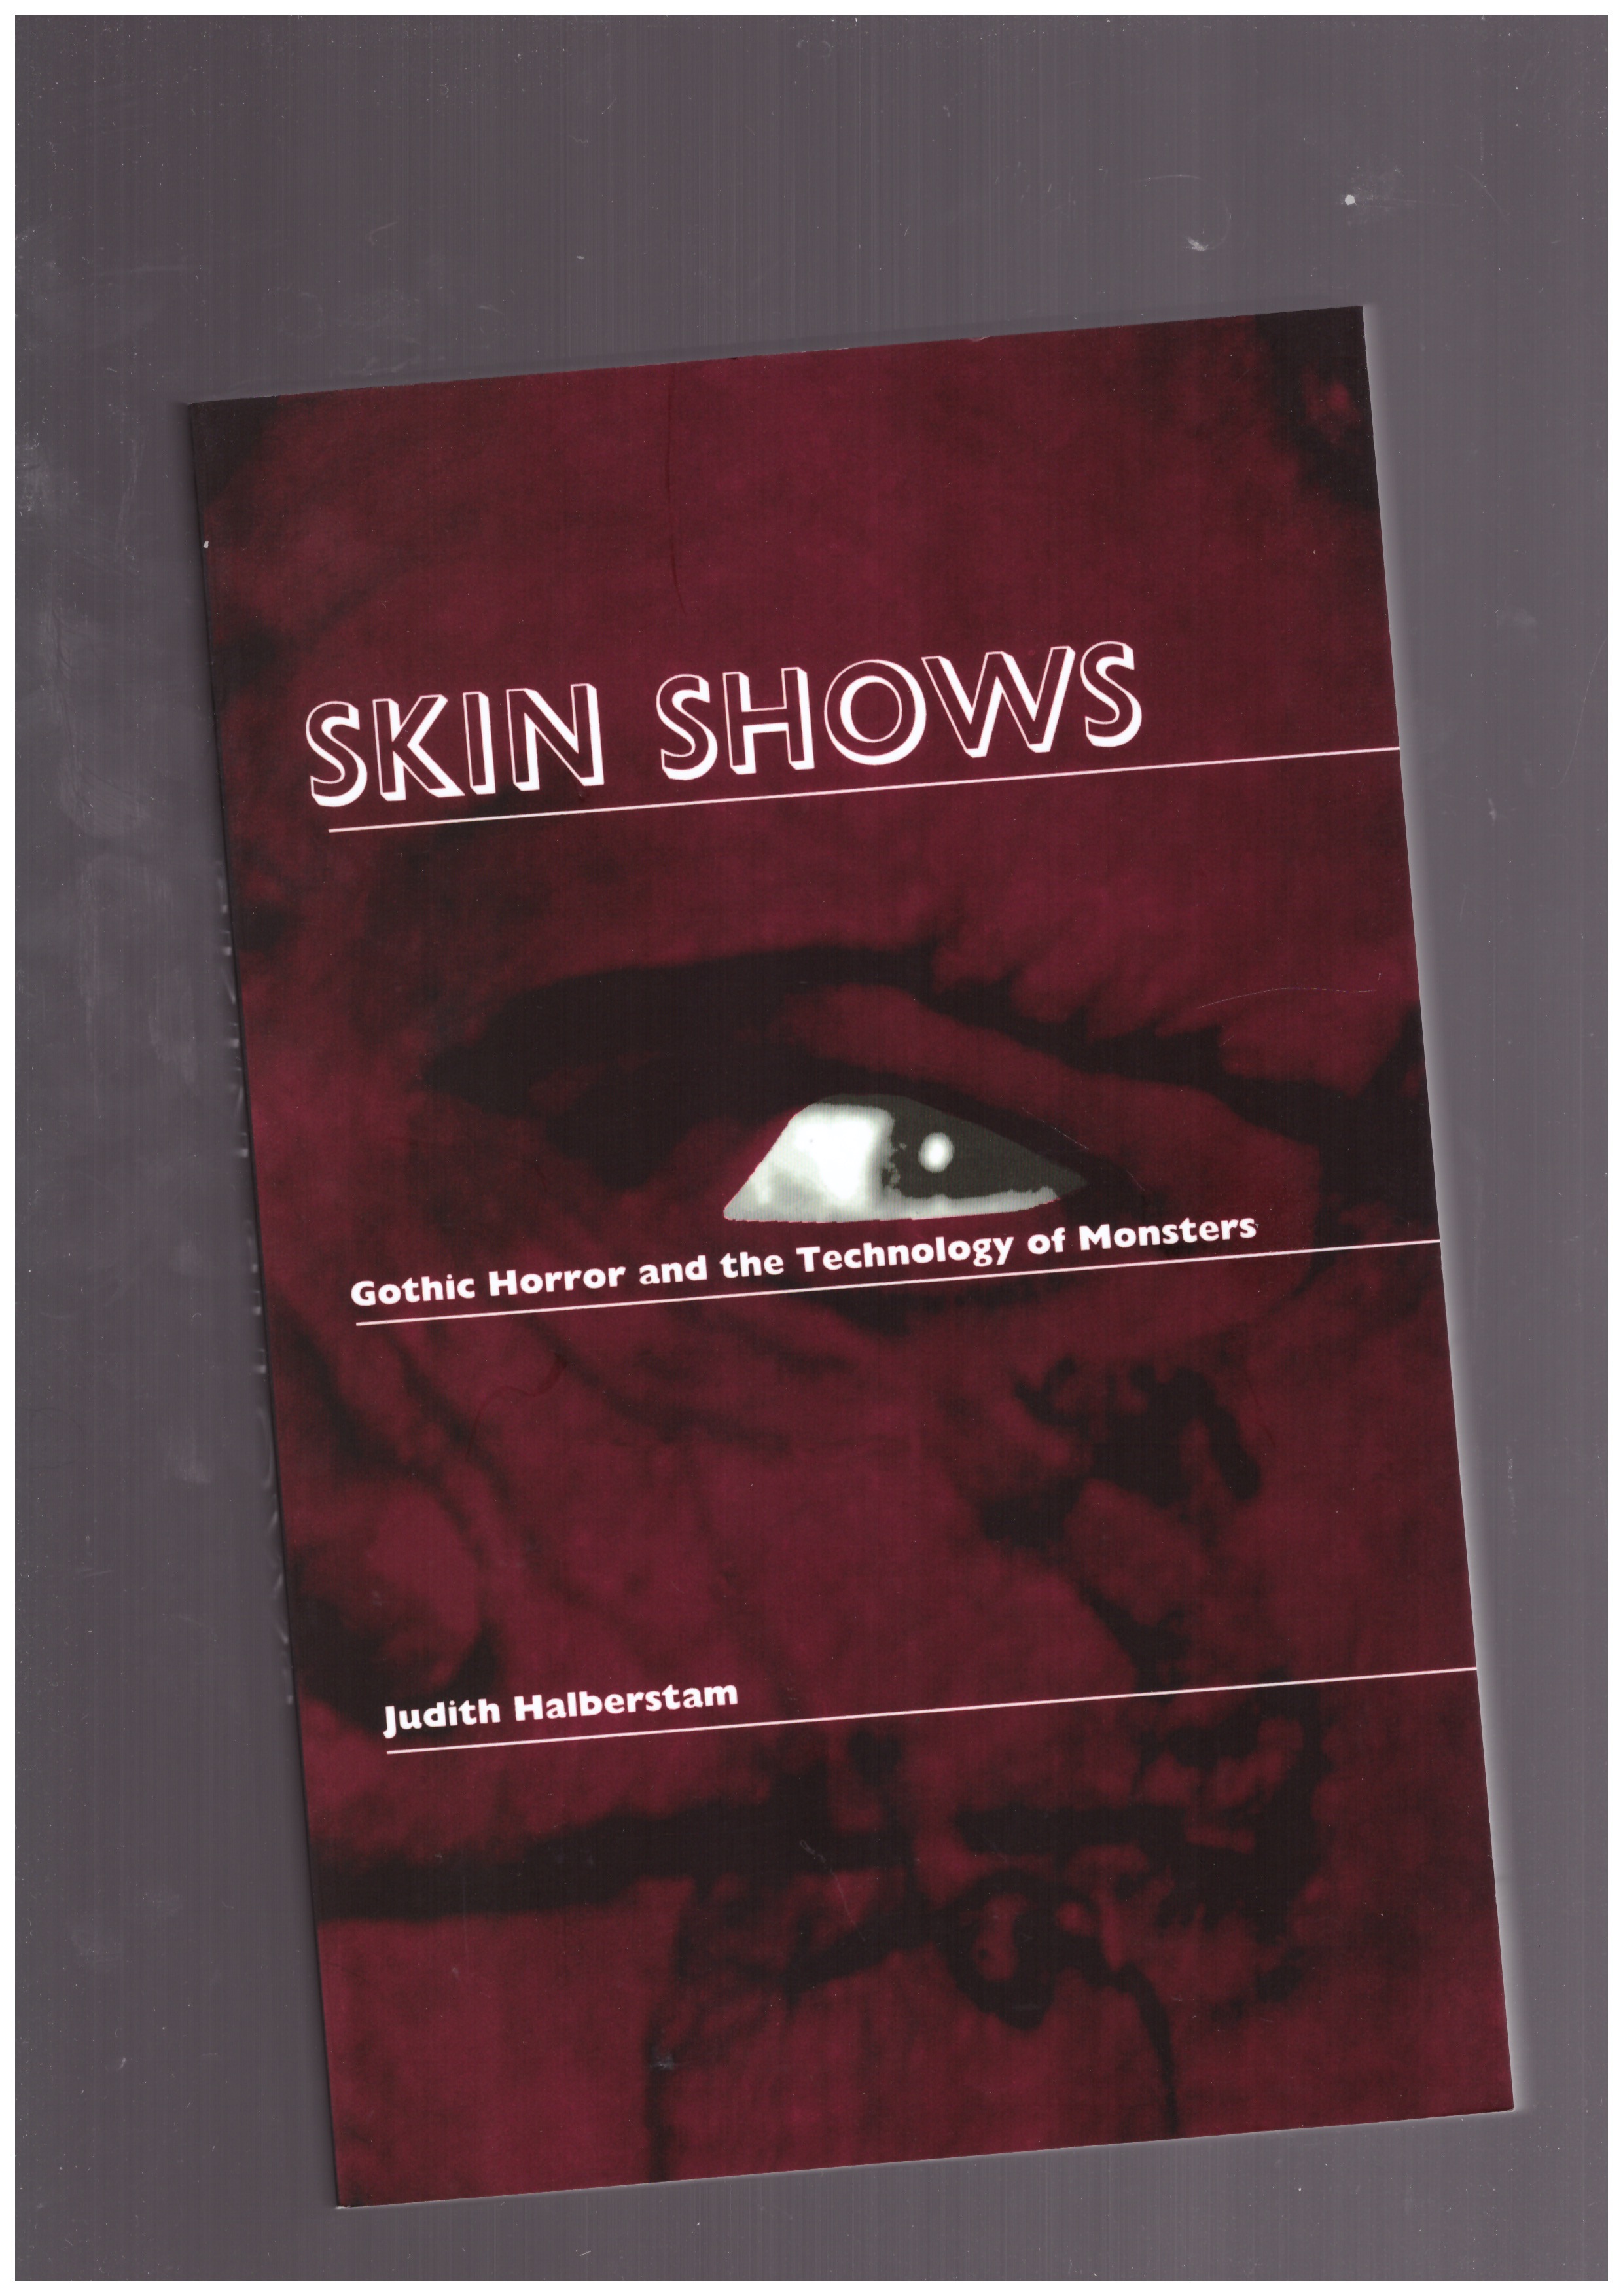 HALBERSTAM, Judith - Skin Shows. Gothic Horror and the Technology of Monsters